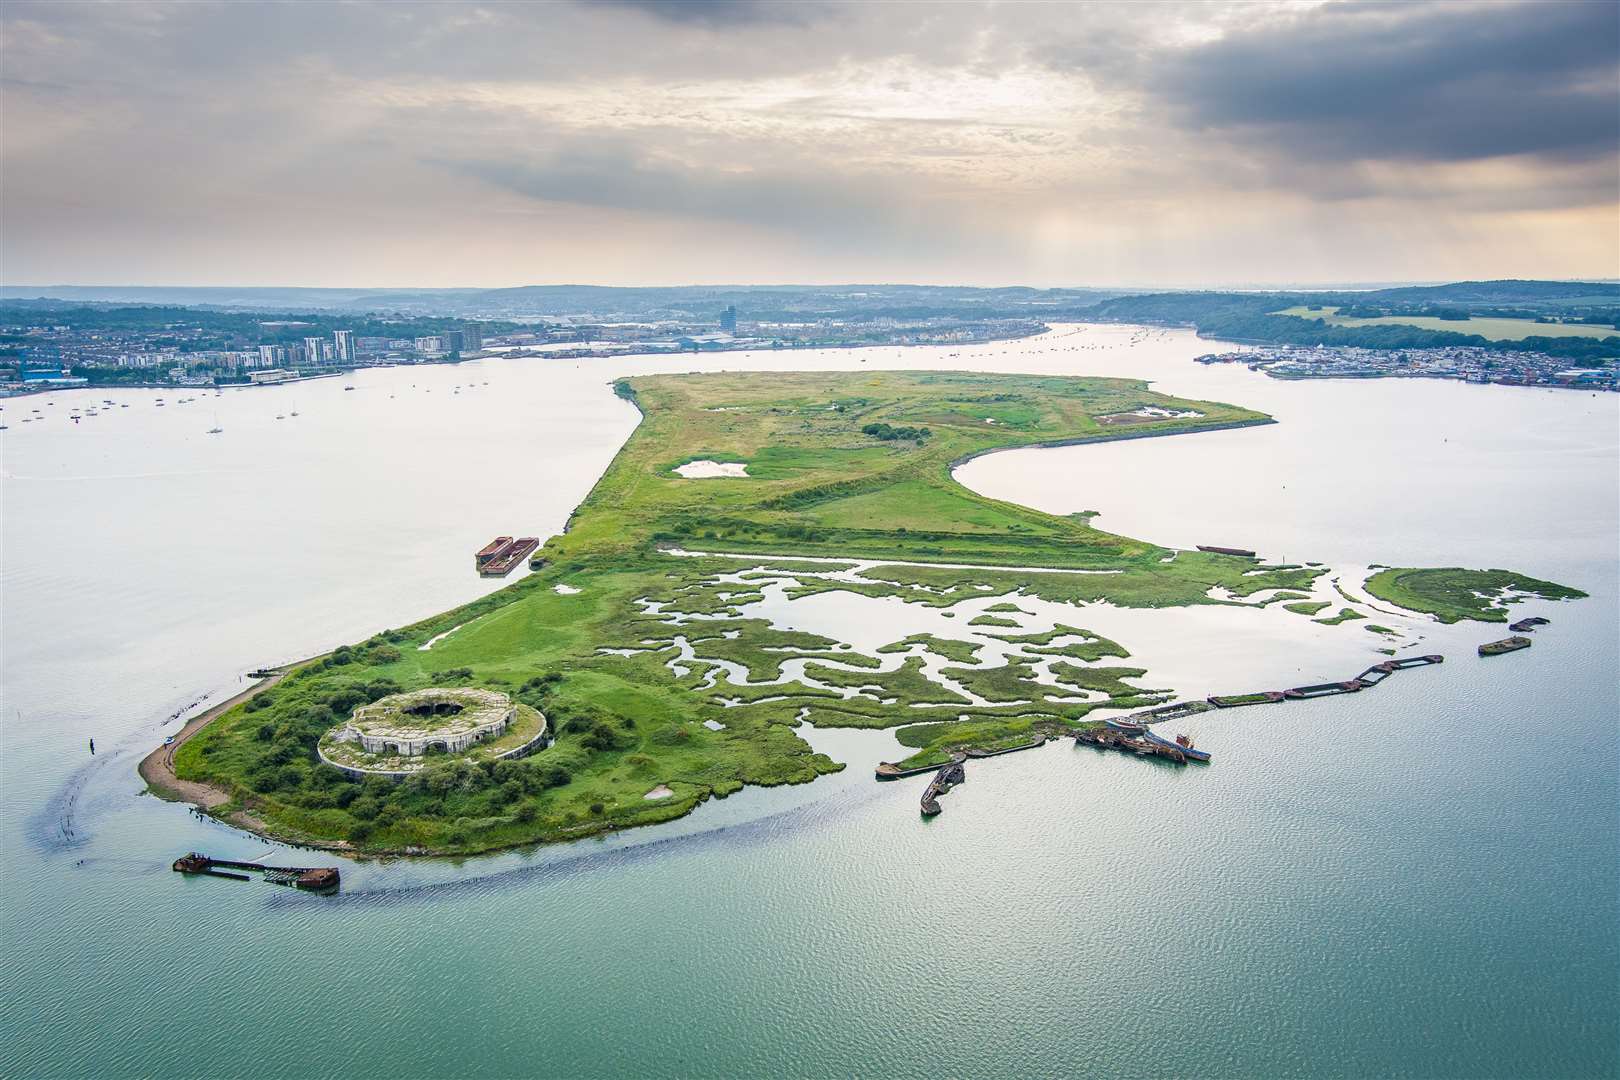 Hoo Fort, built in the 1870s, had 11 guns located in the circular fort. It was initially designed to have two levels but subsidence and overrunning cost issues saw this reduced to a single tier. Picture: Aerial Imaging South East